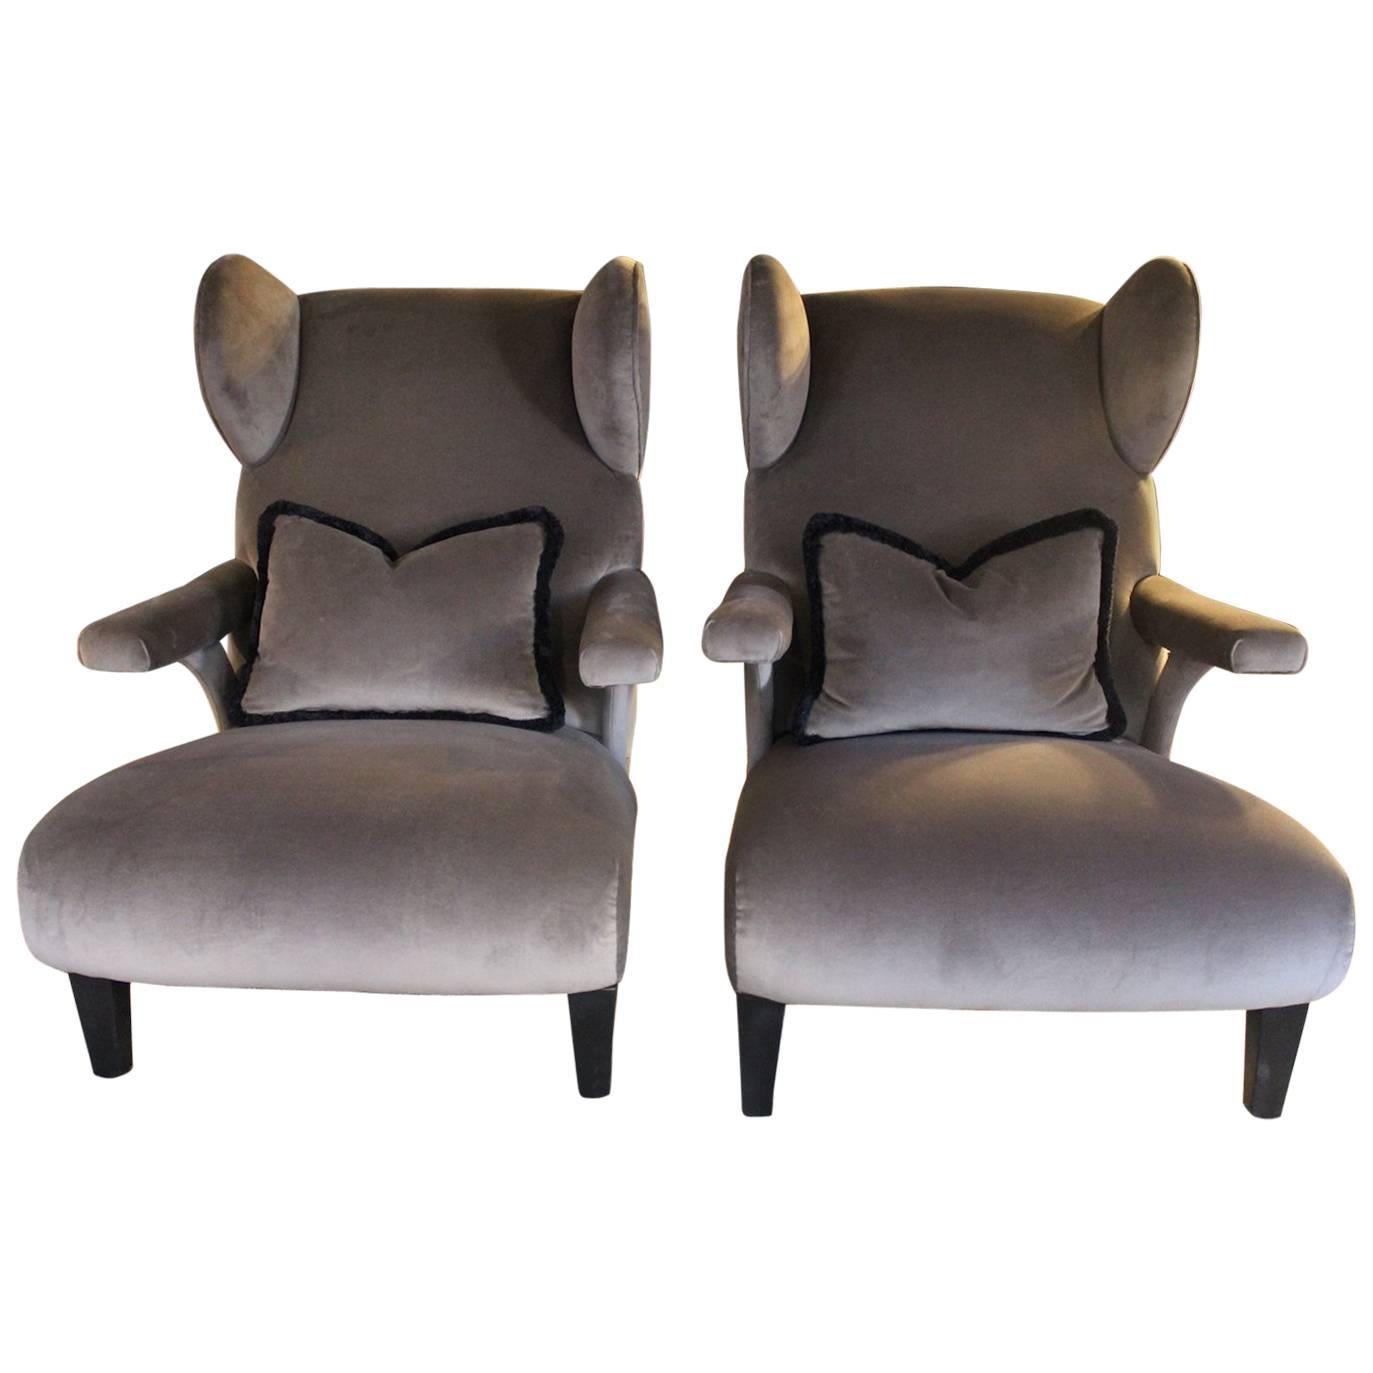 1940s "Bergere" Armchairs For Sale